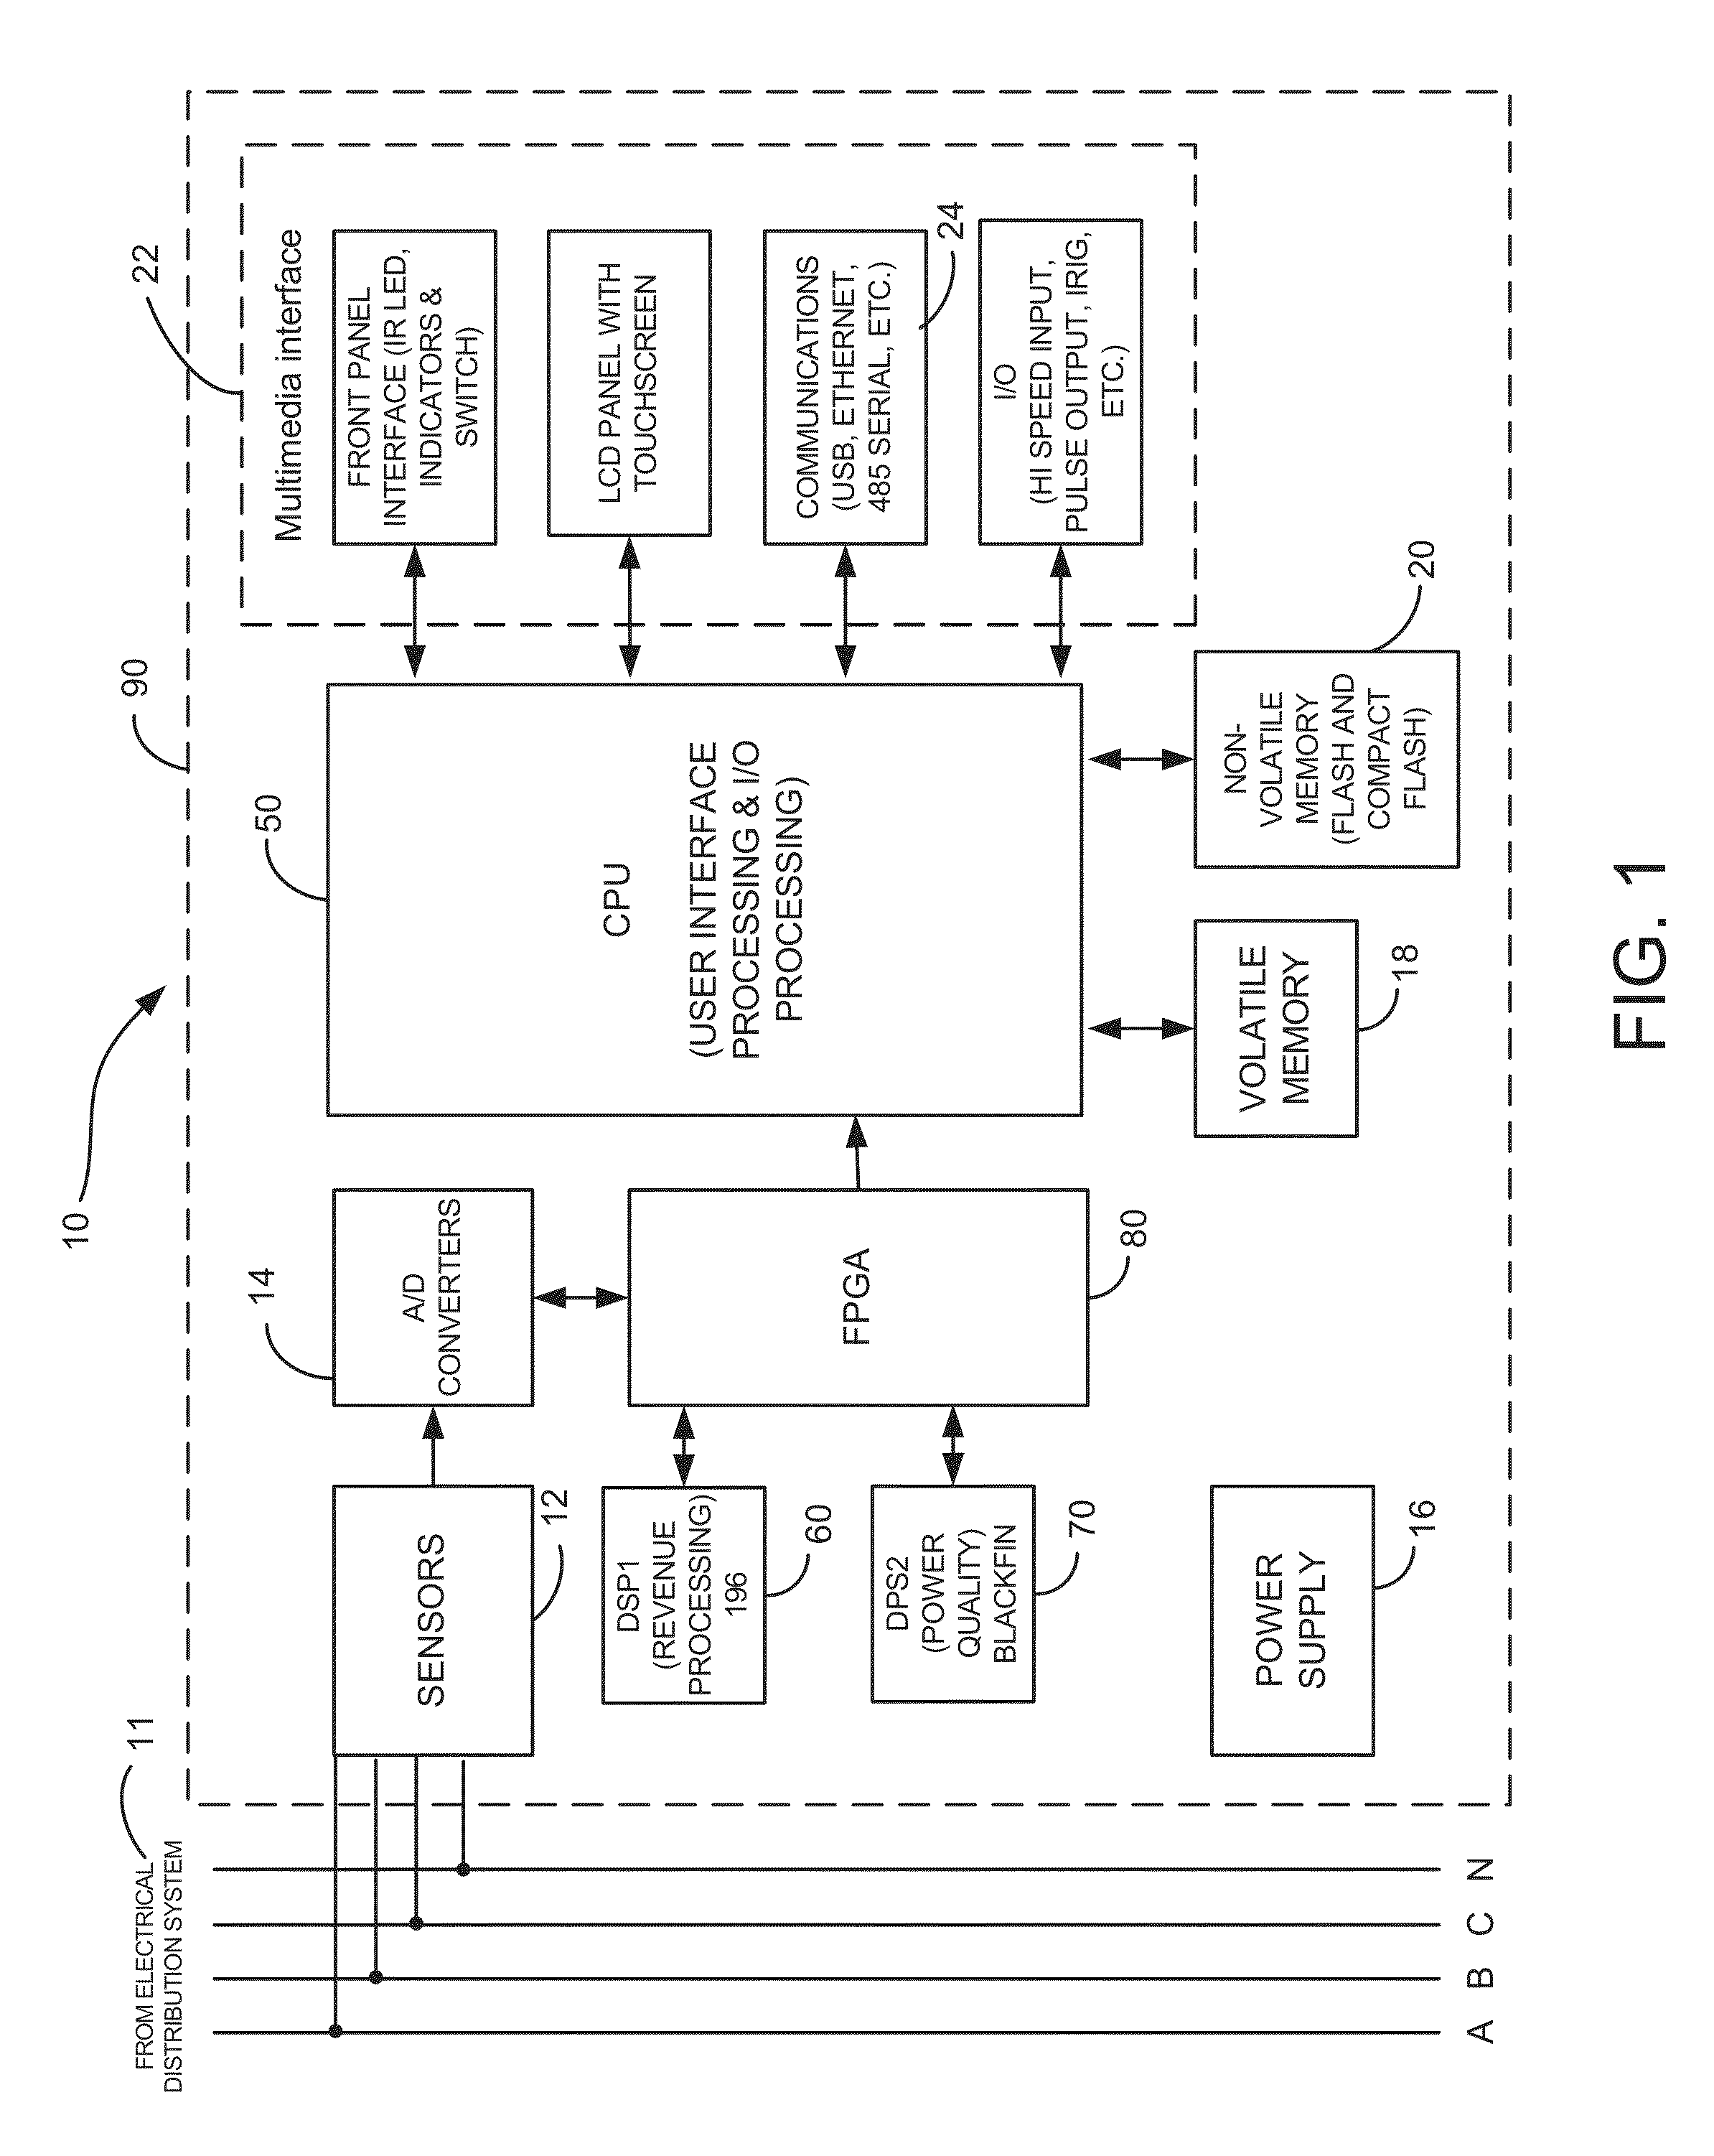 System and method for performing data transfers in an intelligent electronic device